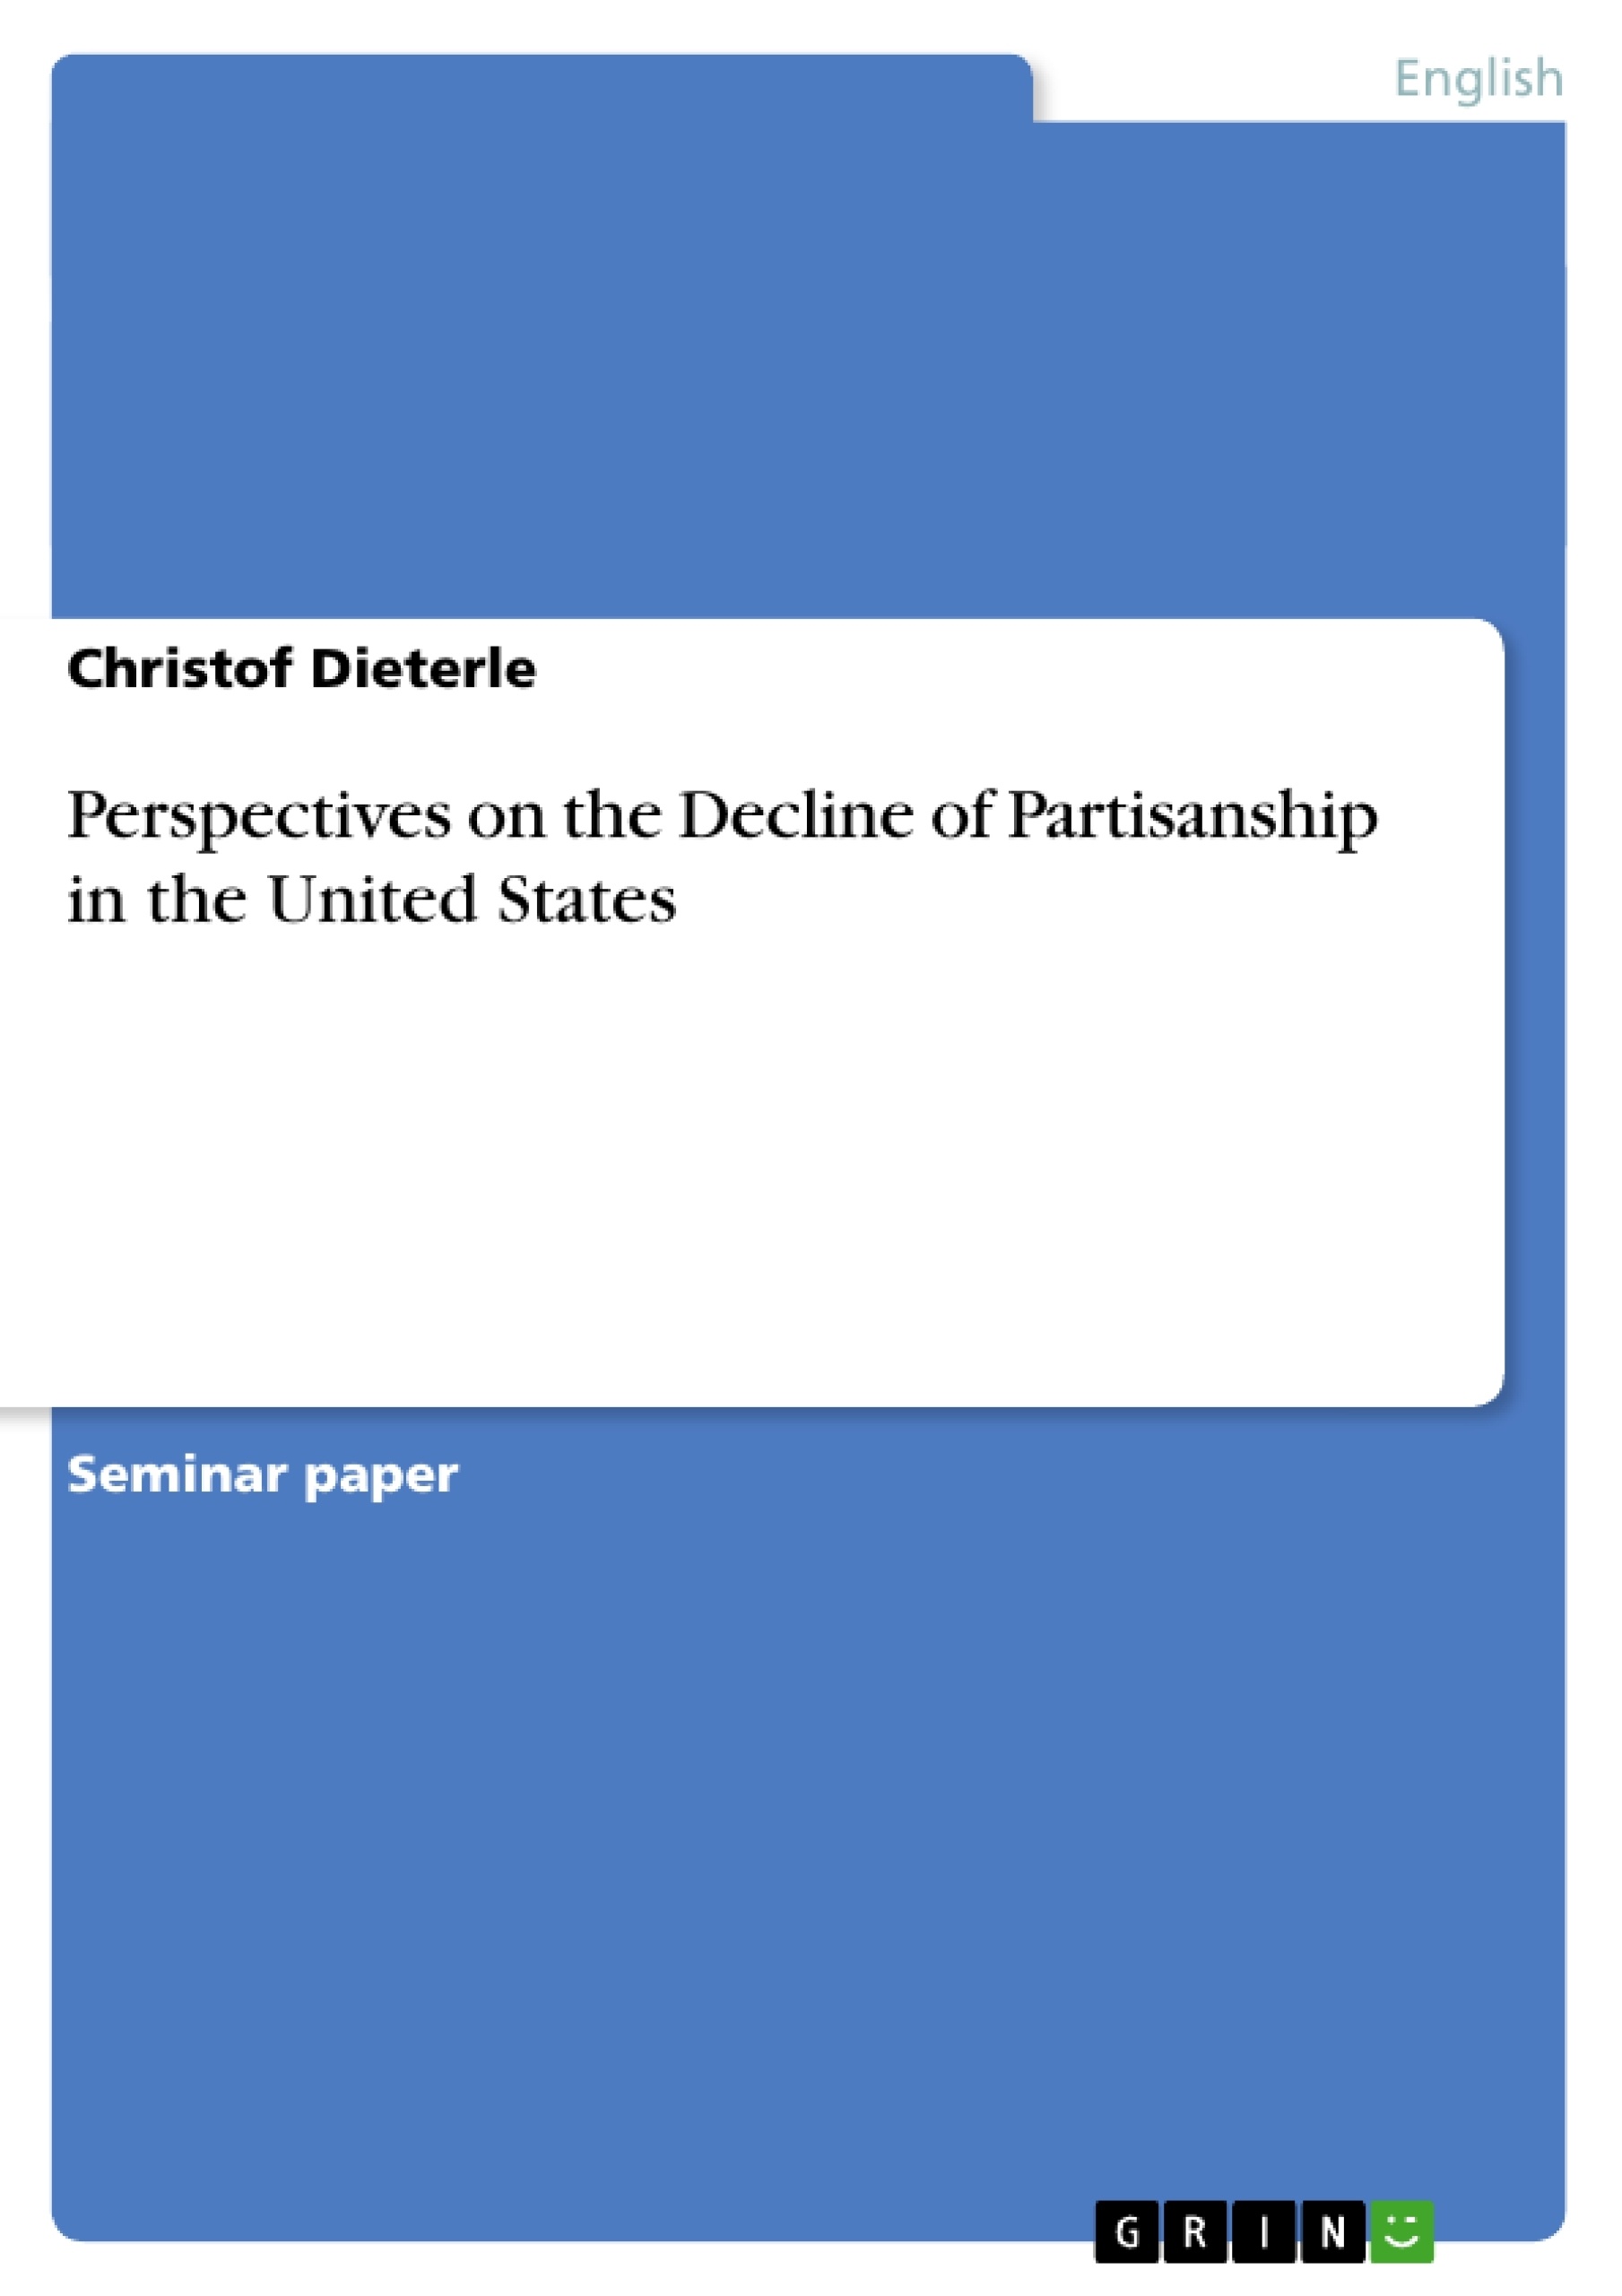 Titre: Perspectives on the Decline of Partisanship in the United States